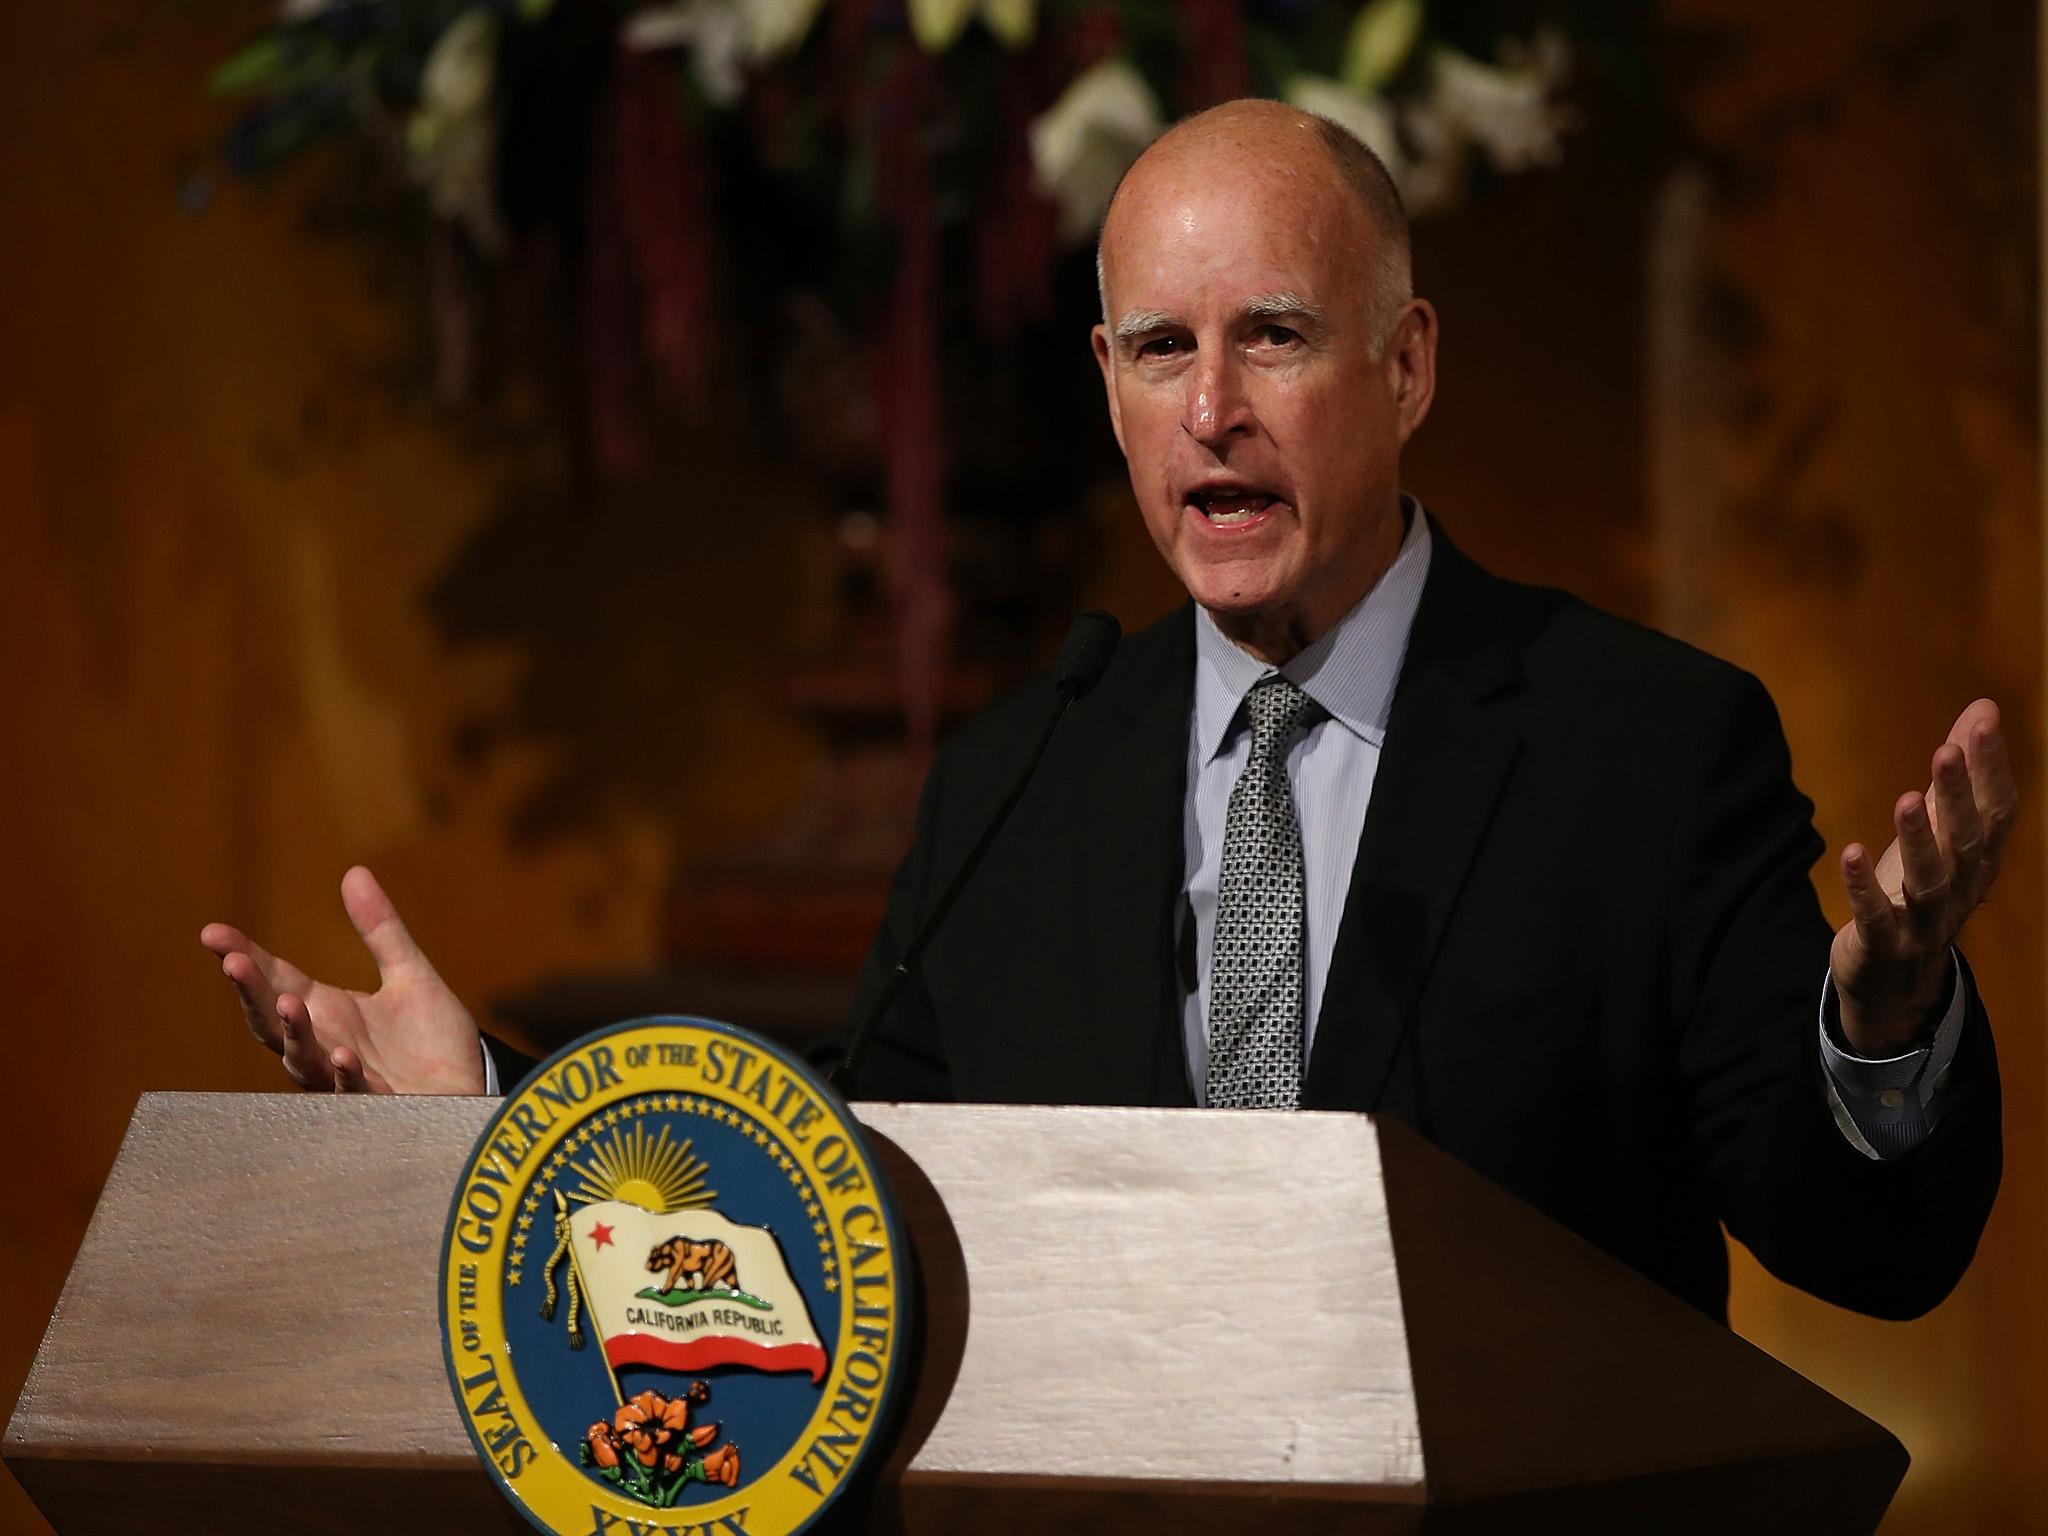 Governor Jerry Brown fought for and won an extension of the California cap and trade programme